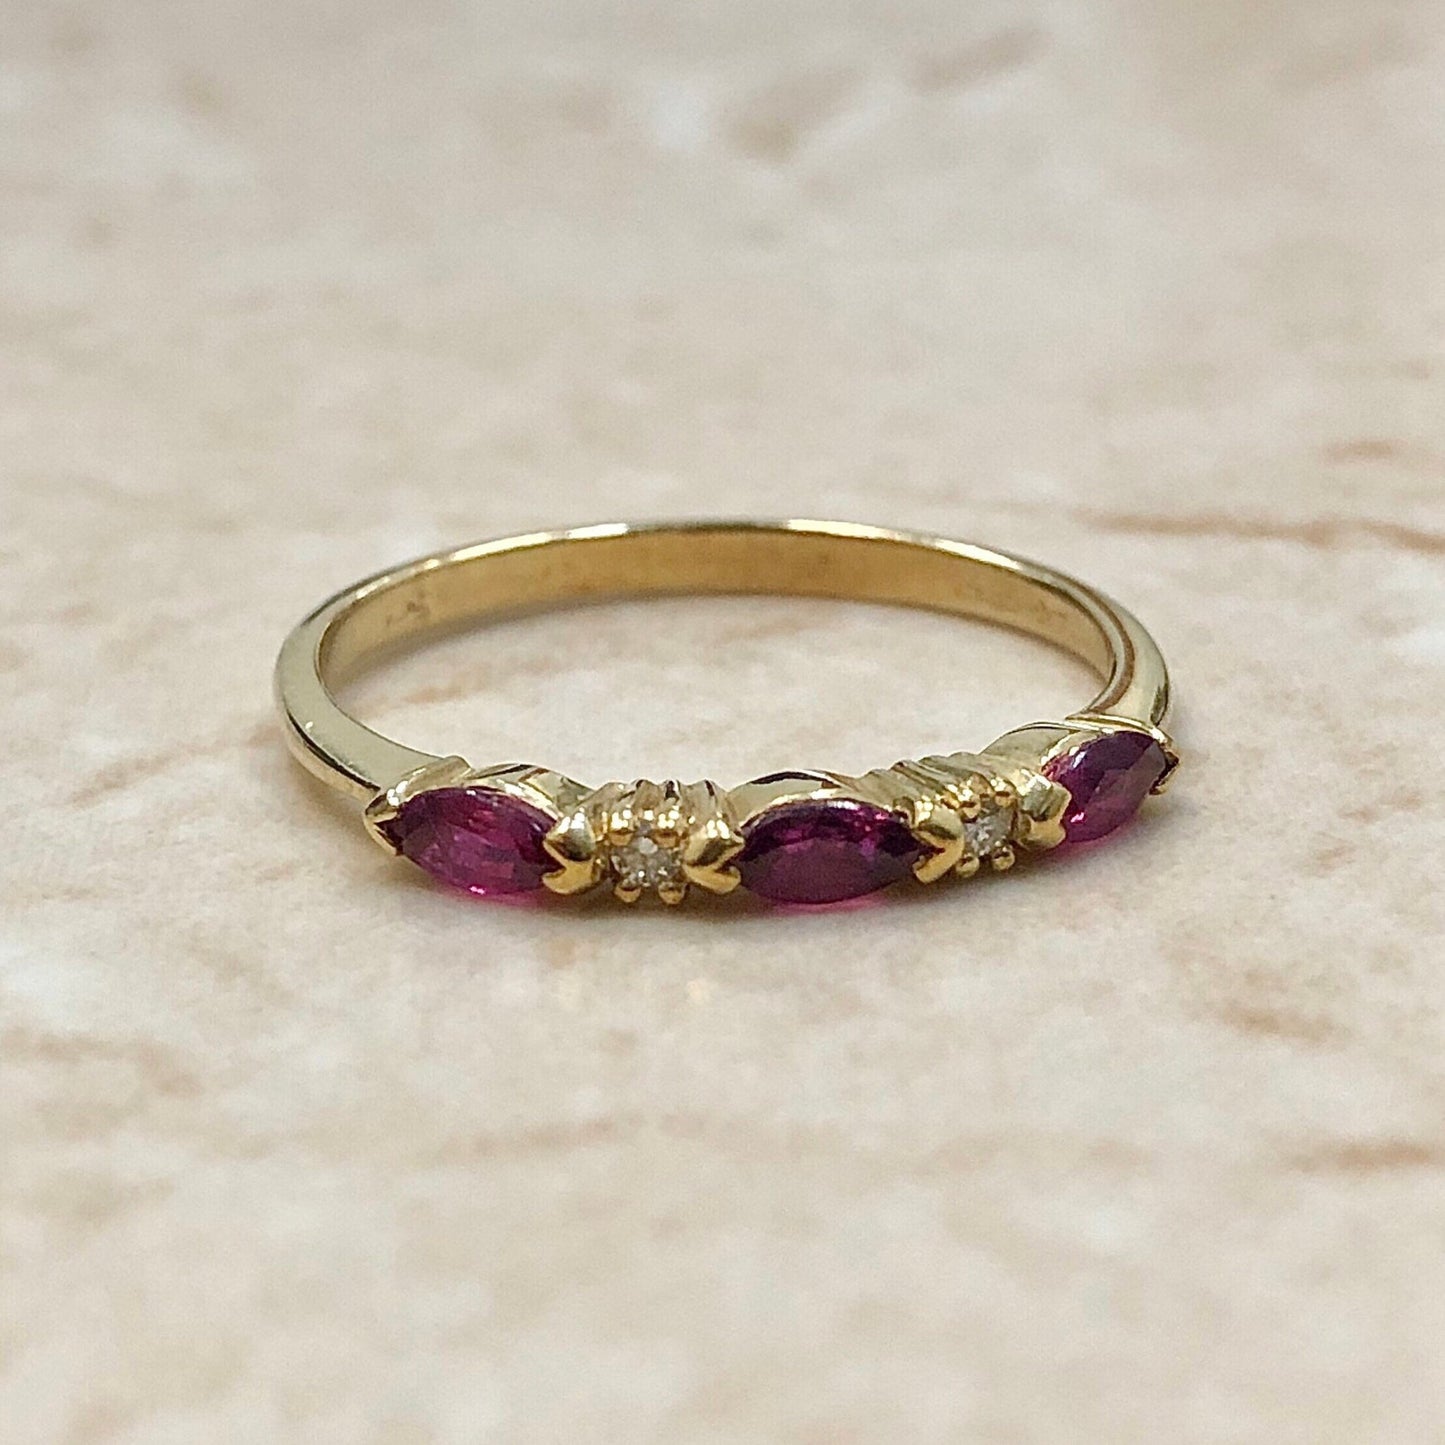 Vintage Ruby & Diamond Ring - 14K Yellow Gold - Genuine Gemstone - Marquise Rubies - July Birthstone - Size 6.5 - Mother’s Day Gift